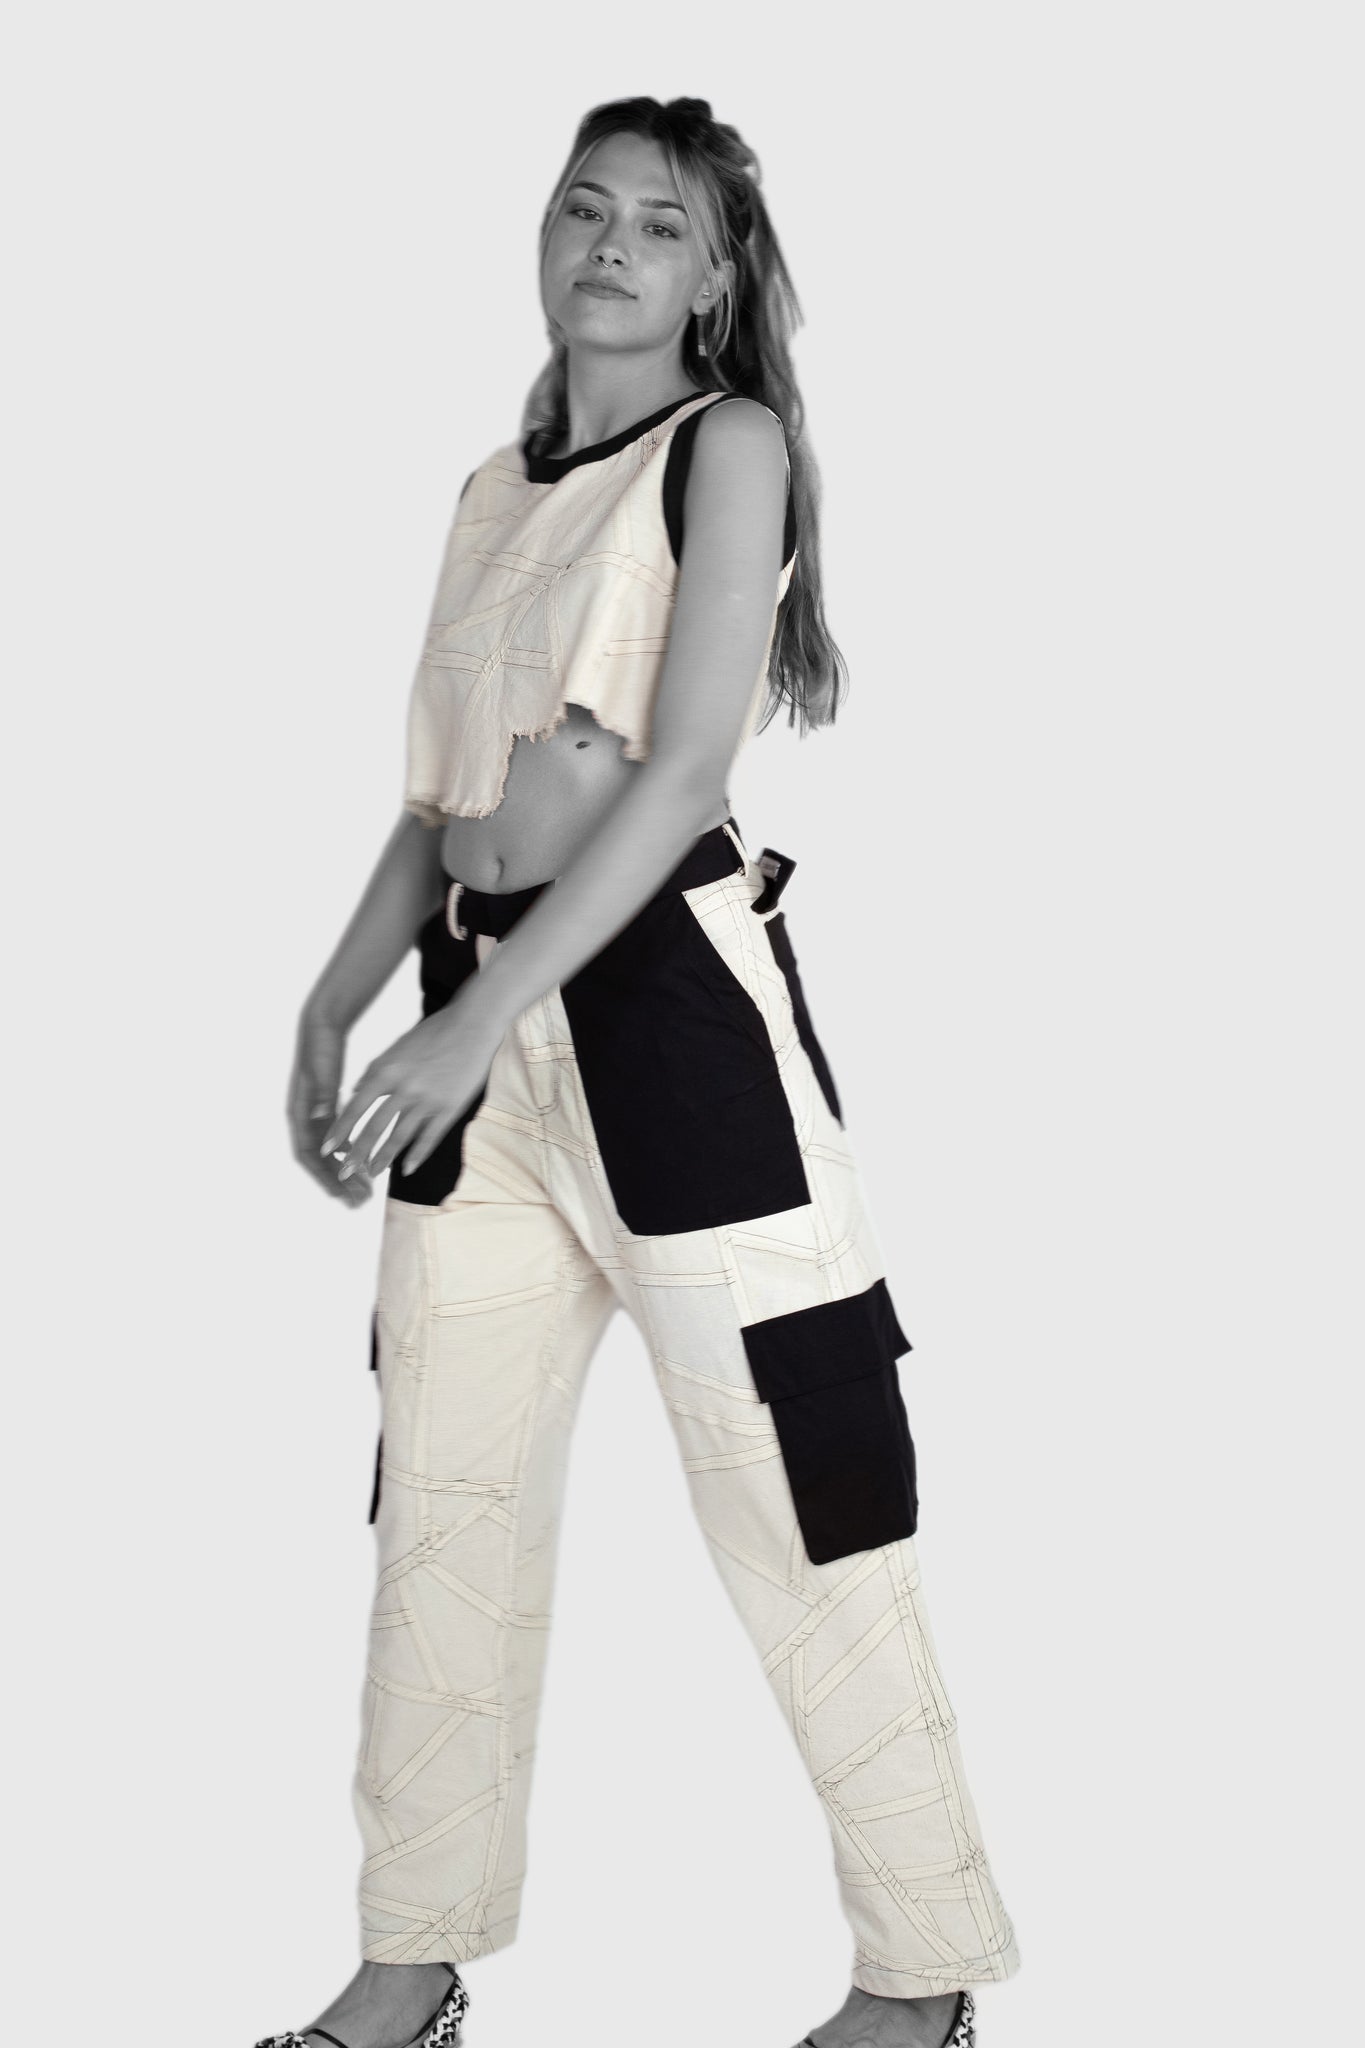 young teens look, women's top and cargo pants, clean geometric lines, Scandinavian colors, light and breathable cotton, recycled from leftover stock inside the atelier, sustainable fashion design, straight fit, high waist, with belt loops, easy to style with simple tee or bra and jacket